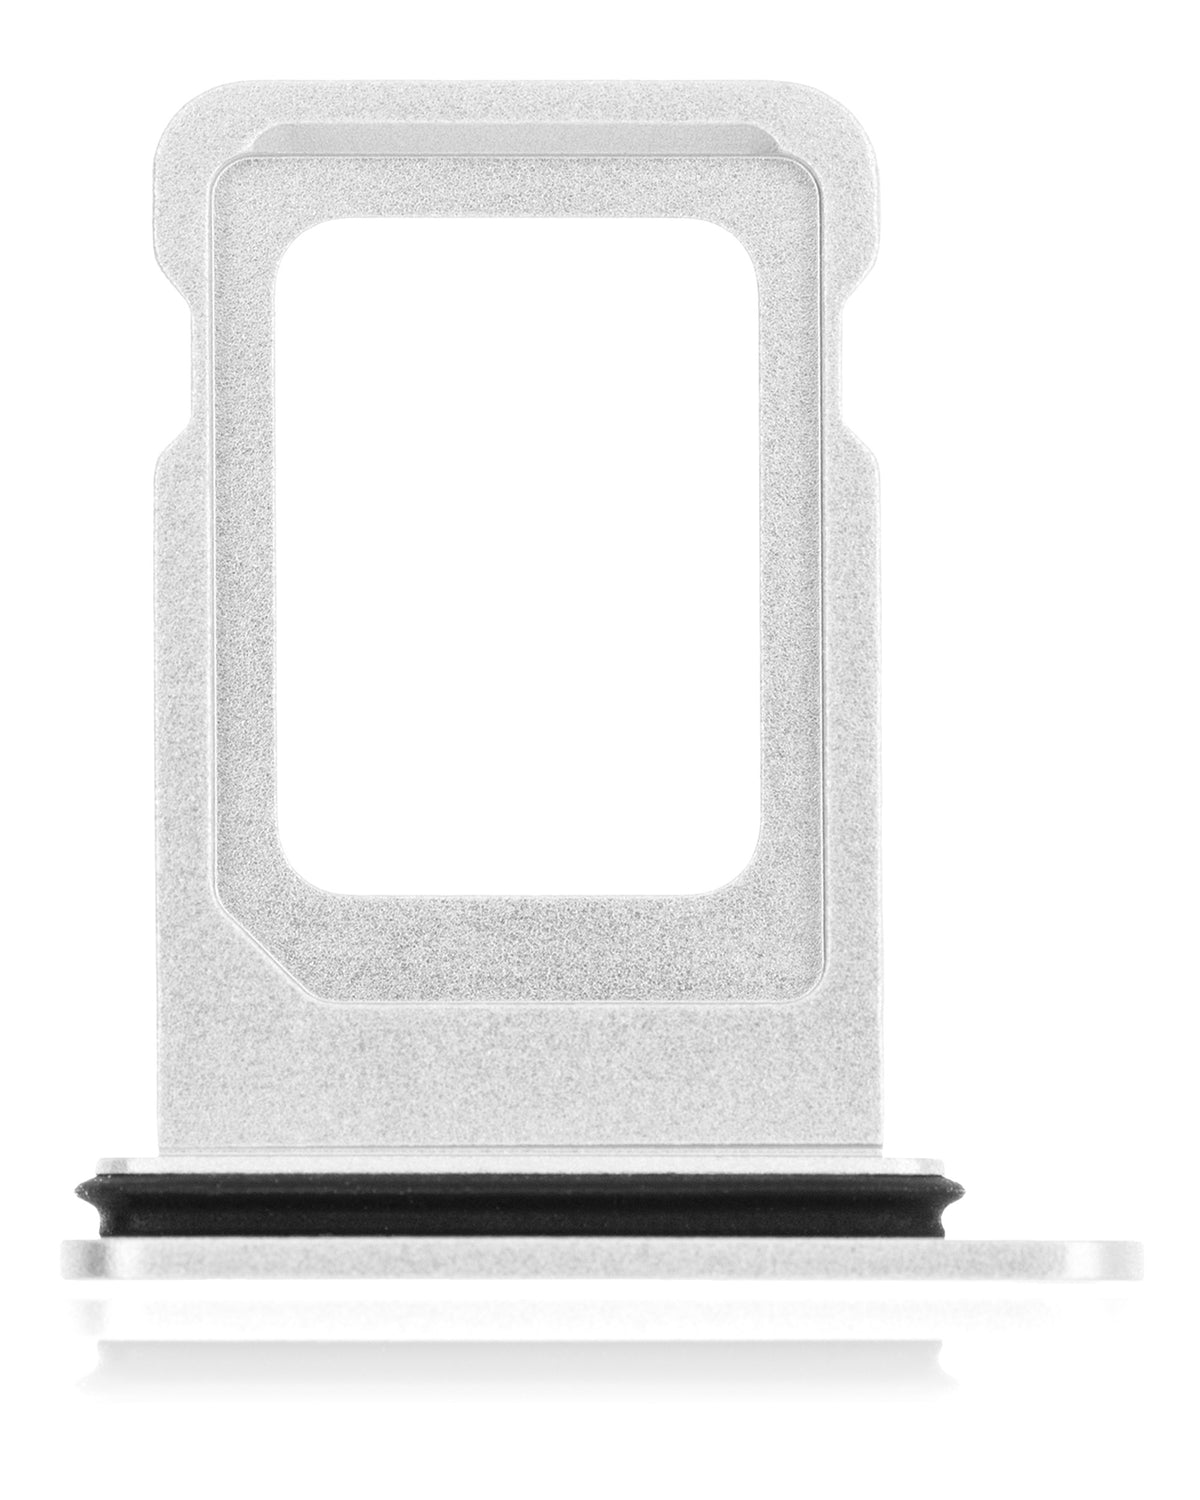 GREEN DUAL SIM CARD TRAY COMPATIBLE WITH IPHONE 12